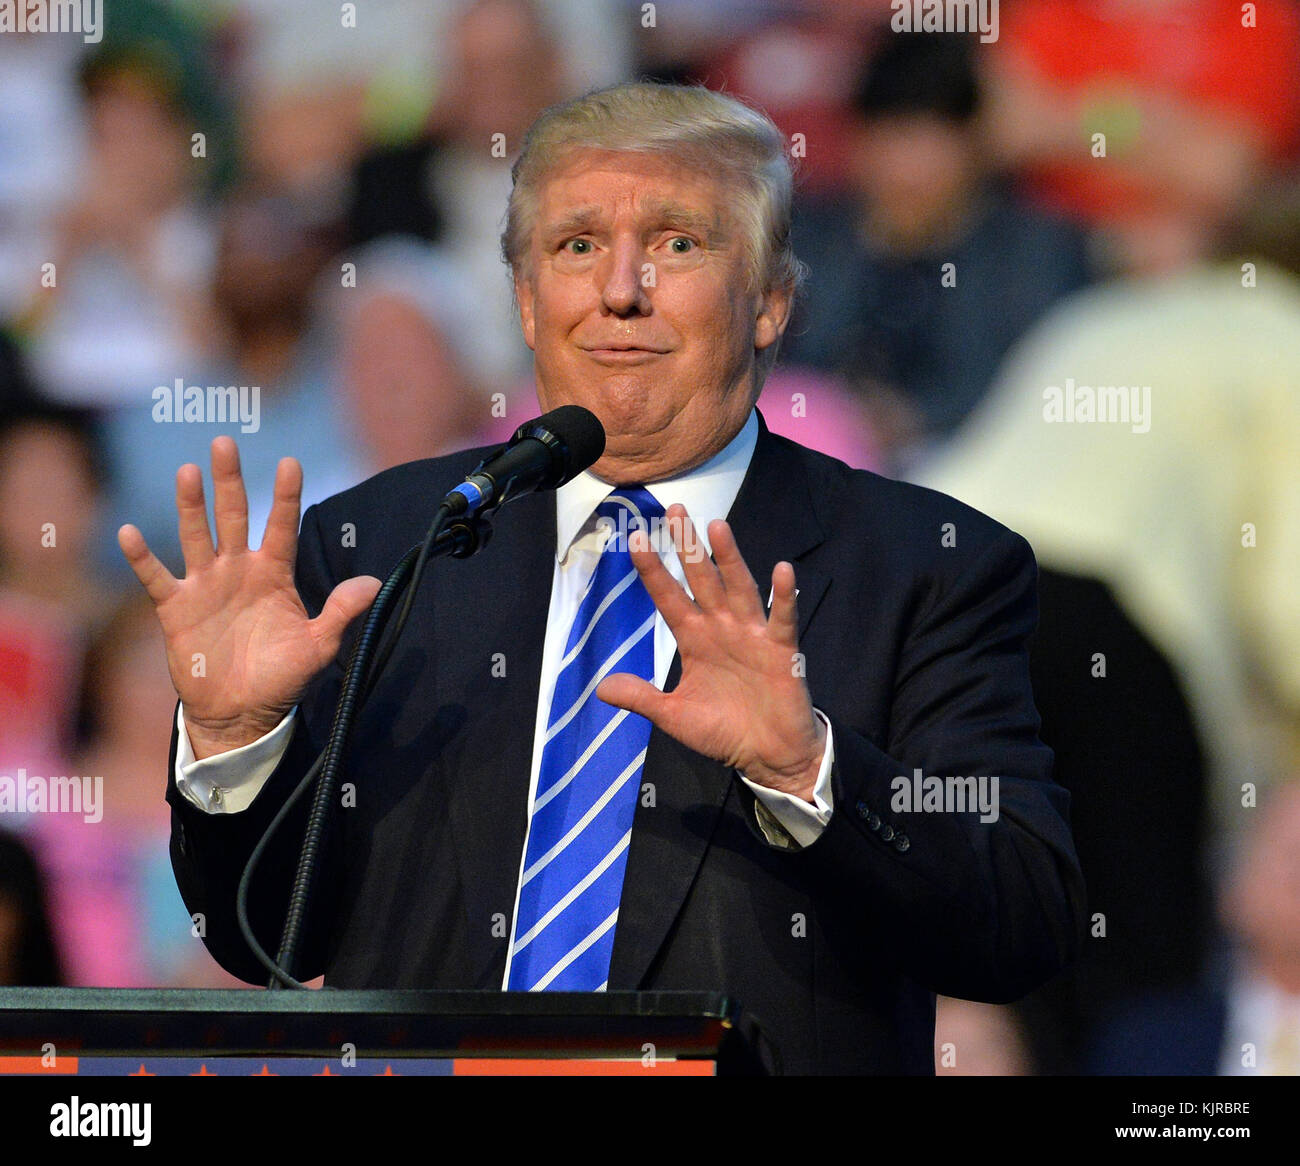 FORT LAUDERDALE, FL - AUGUST 10: Donald Trump on Wednesday again slammed Hillary Clinton and her campaign for allowing the father of Orlando shooter Omar Mateen to sit in the stands behind her at a recent rally But sitting behind Trump was ex-congressman Mark Foley, who resigned in disgrace in 2006 after sending sexually explicit messages to underage teenage boys.during his campaign event at the BB&T Center on August 10, 2016 in Fort Lauderdale, Florida.  People:  Mark Foley, Donald Trump Stock Photo